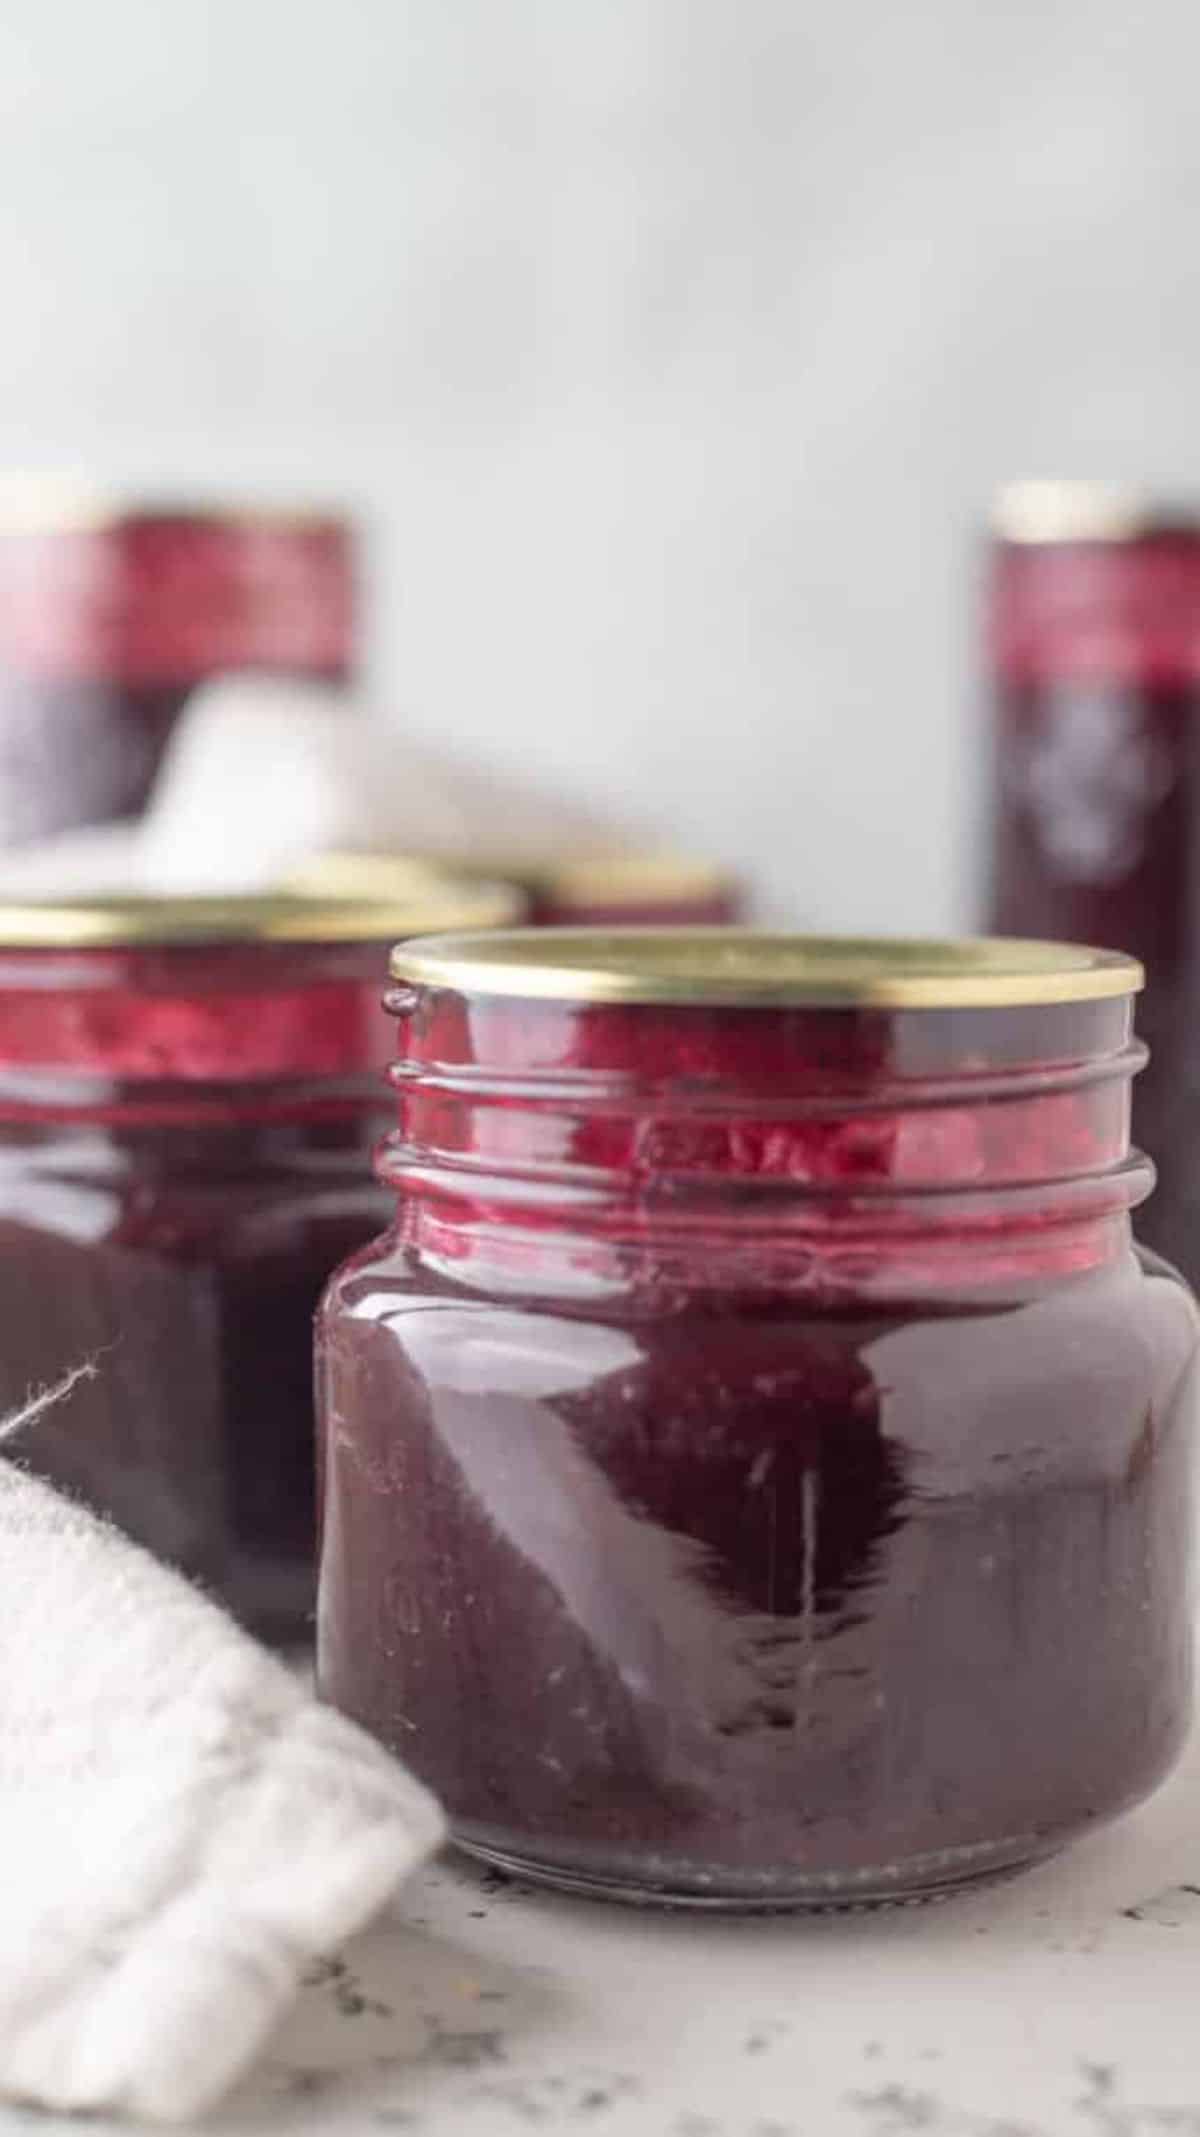 Blueberry syrup canned in glass jars.